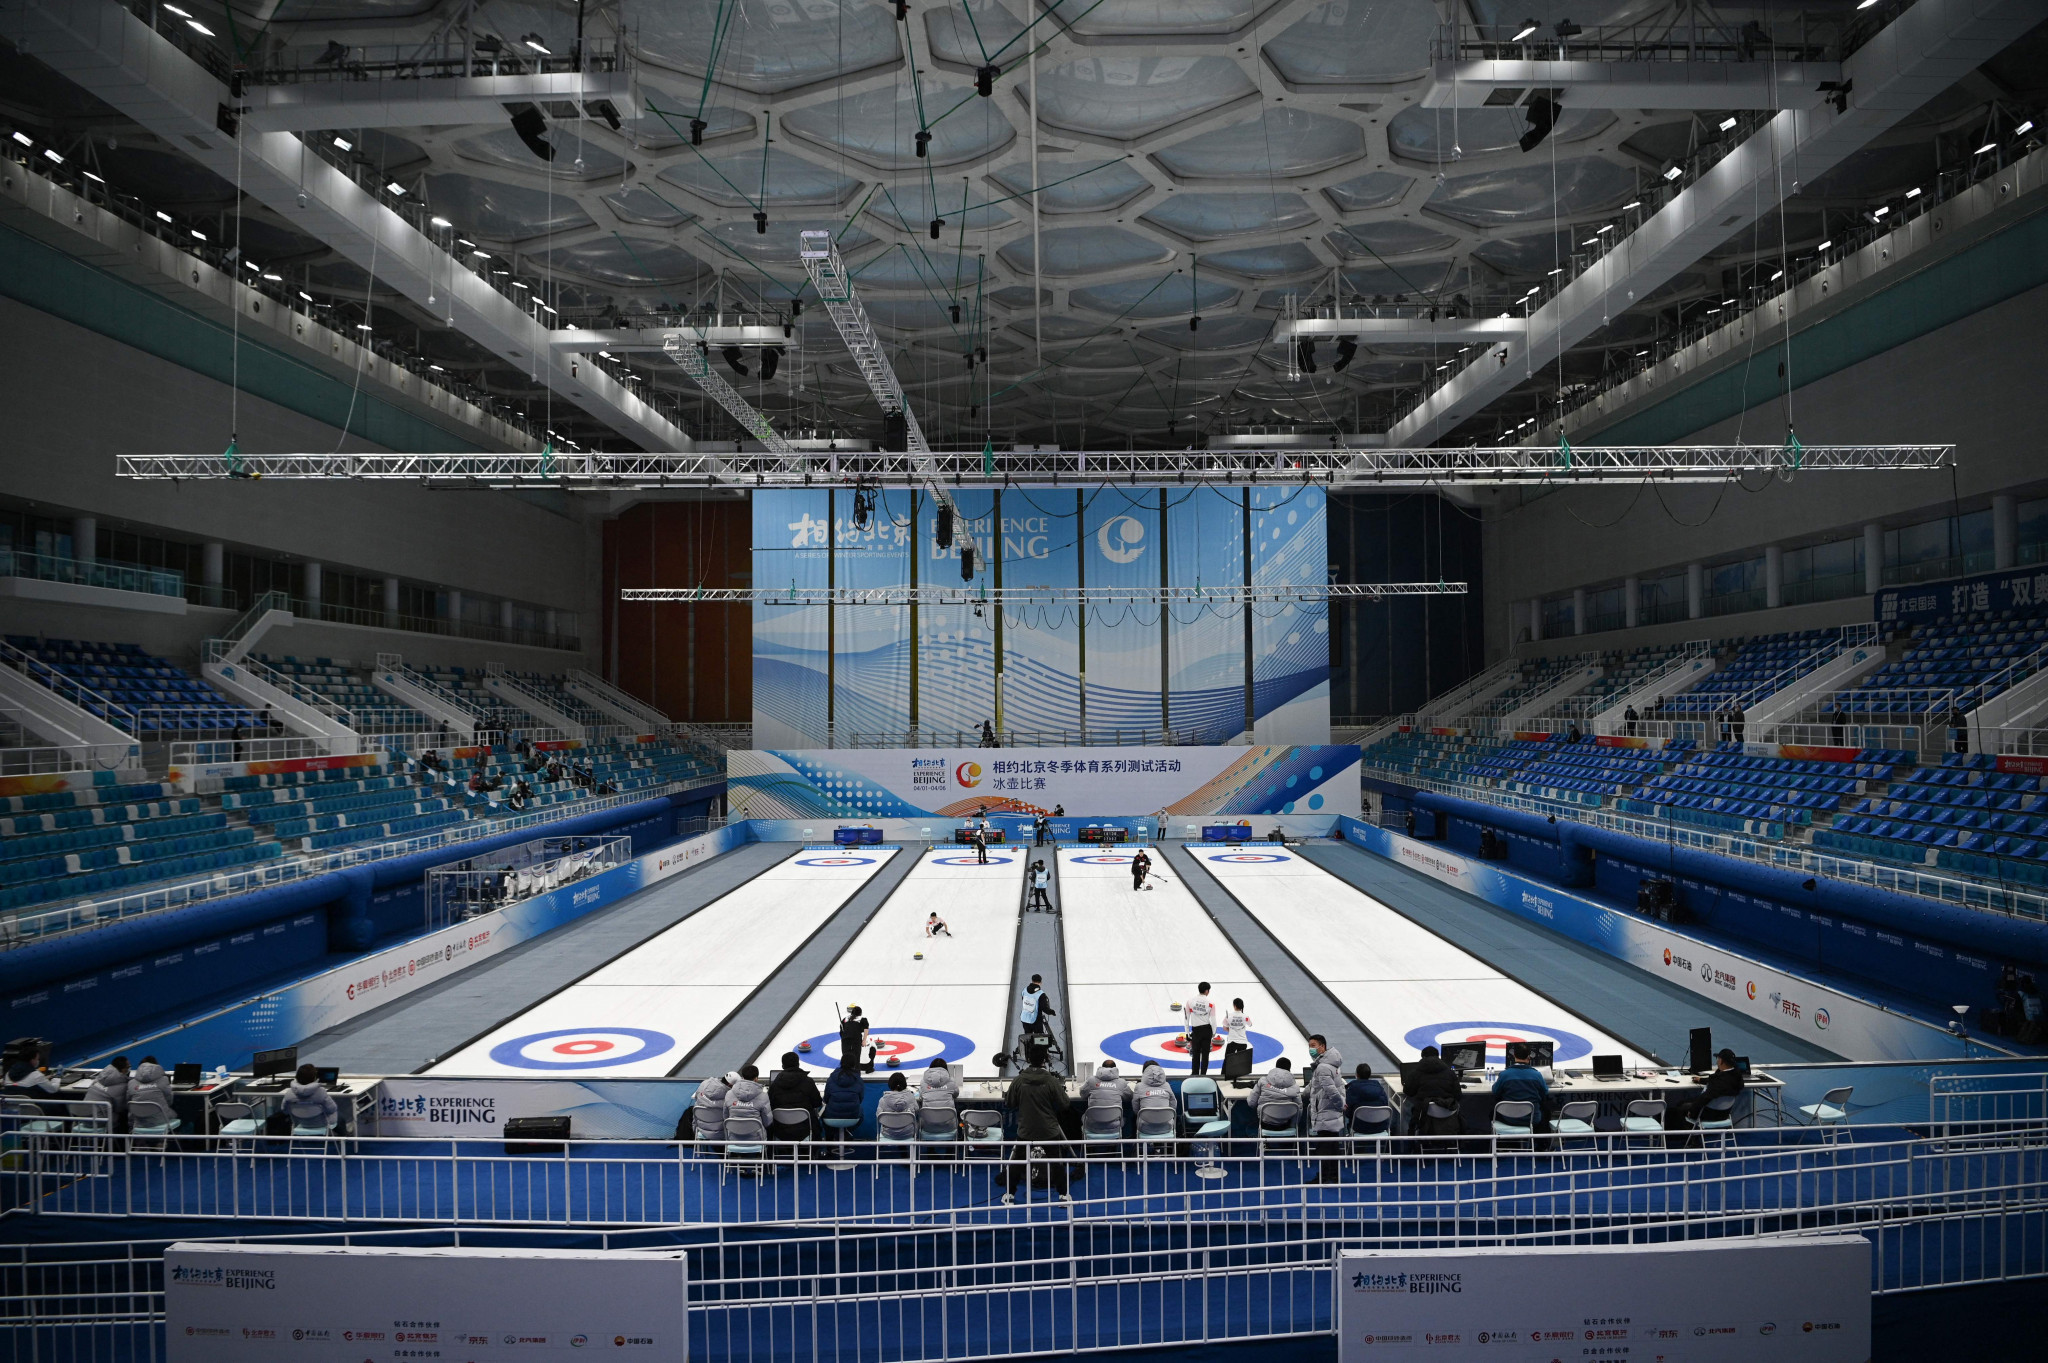 Measures at indoor venues such as the National Aquatics Centre, where the 2021 World Wheelchair Curling Championship is due to be held in October, could include segregating spectators from athletes and officials ©Getty Images